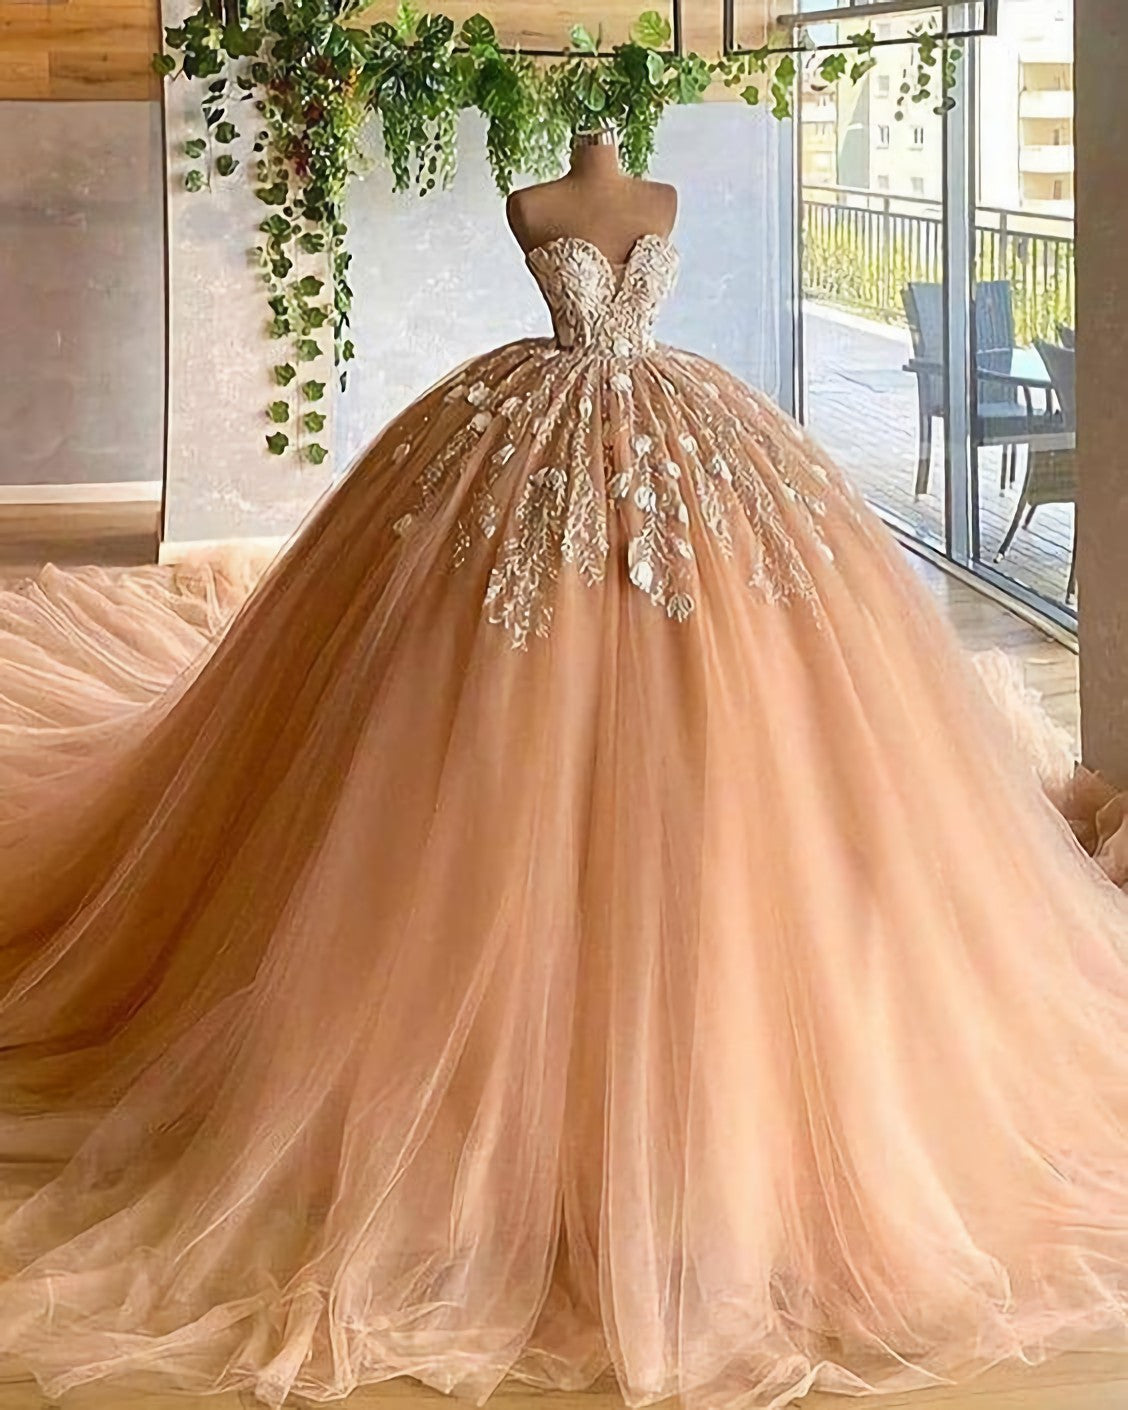 Prom Dress 2028, Applique Tulle Pleated Sweetheart Champagne Ball Gown Evening Dress